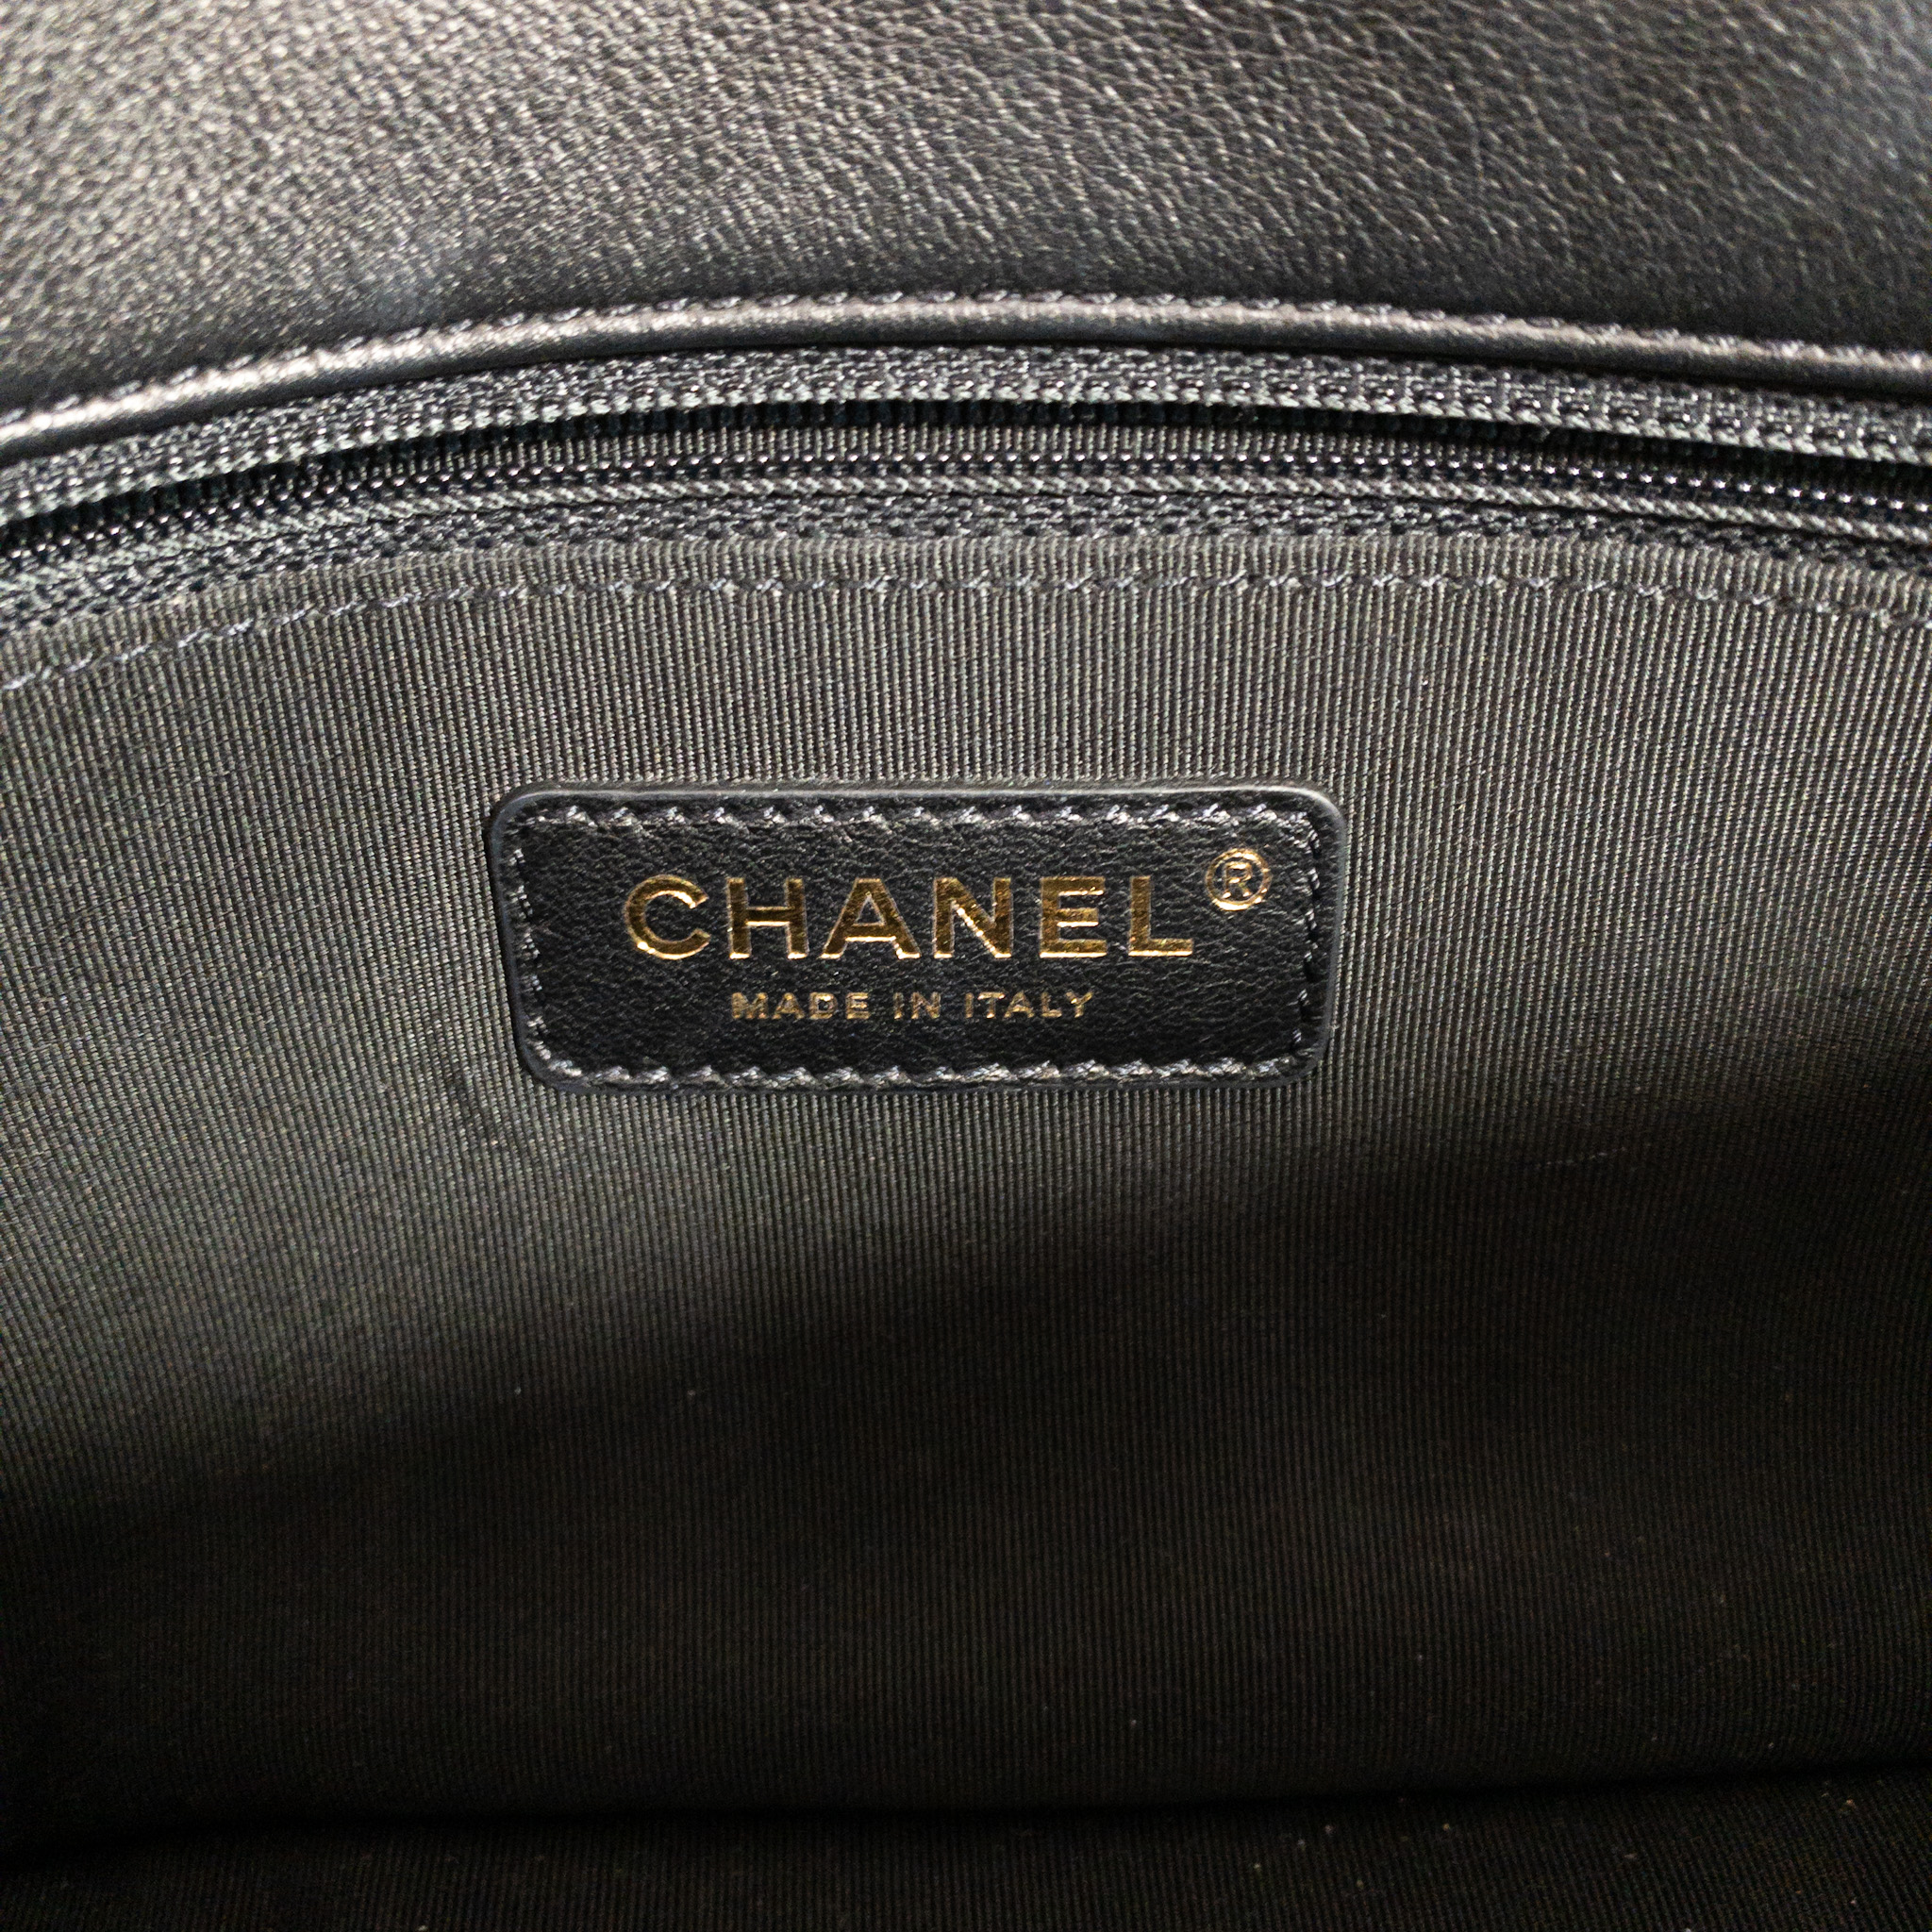 Chanel Sequin Tweed Pearl Strap Flap Bag